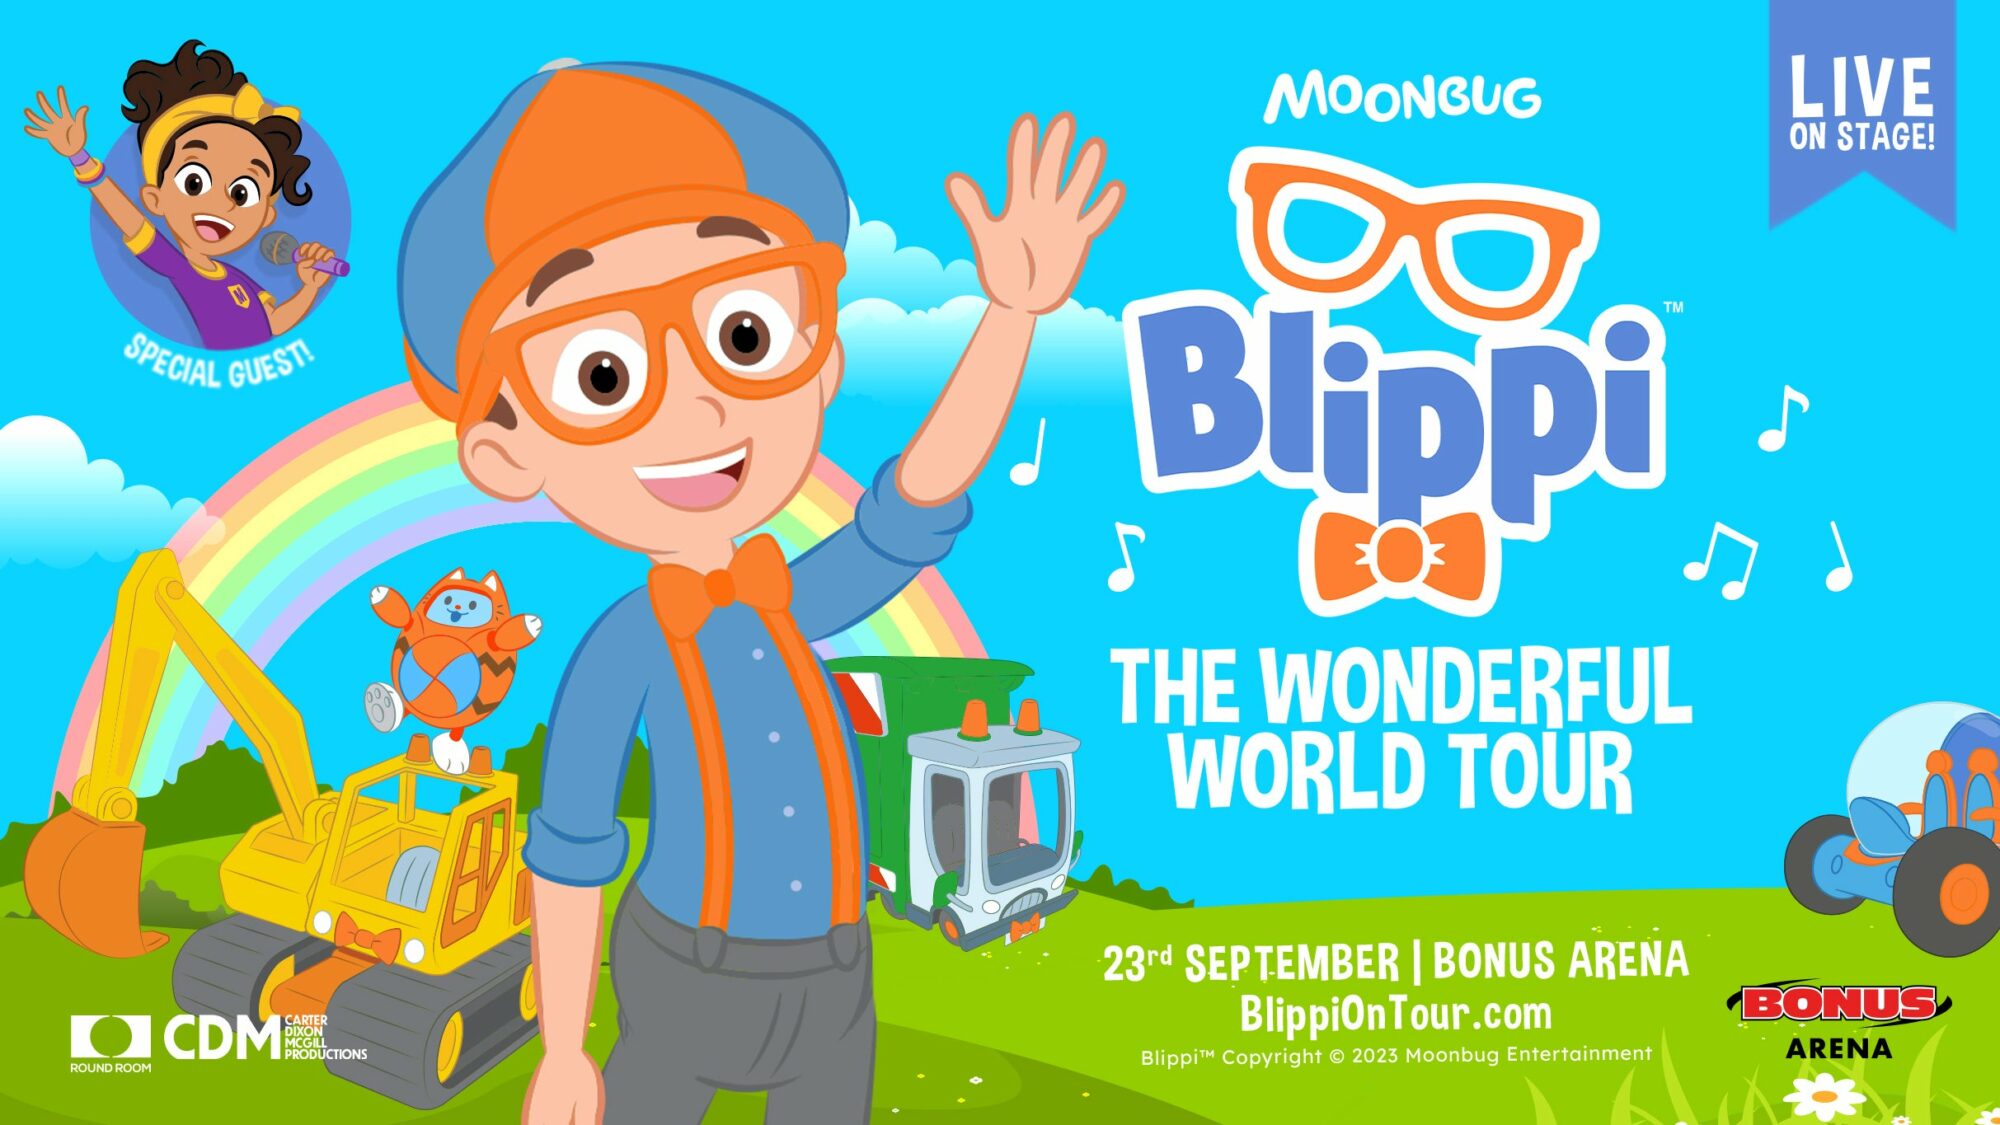 Image name Blippi The Wonderful World Tour at Bonus Arena Hull Hull the 1 image from the post Blippi - The Wonderful World Tour at Connexin Live, Hull in Yorkshire.com.